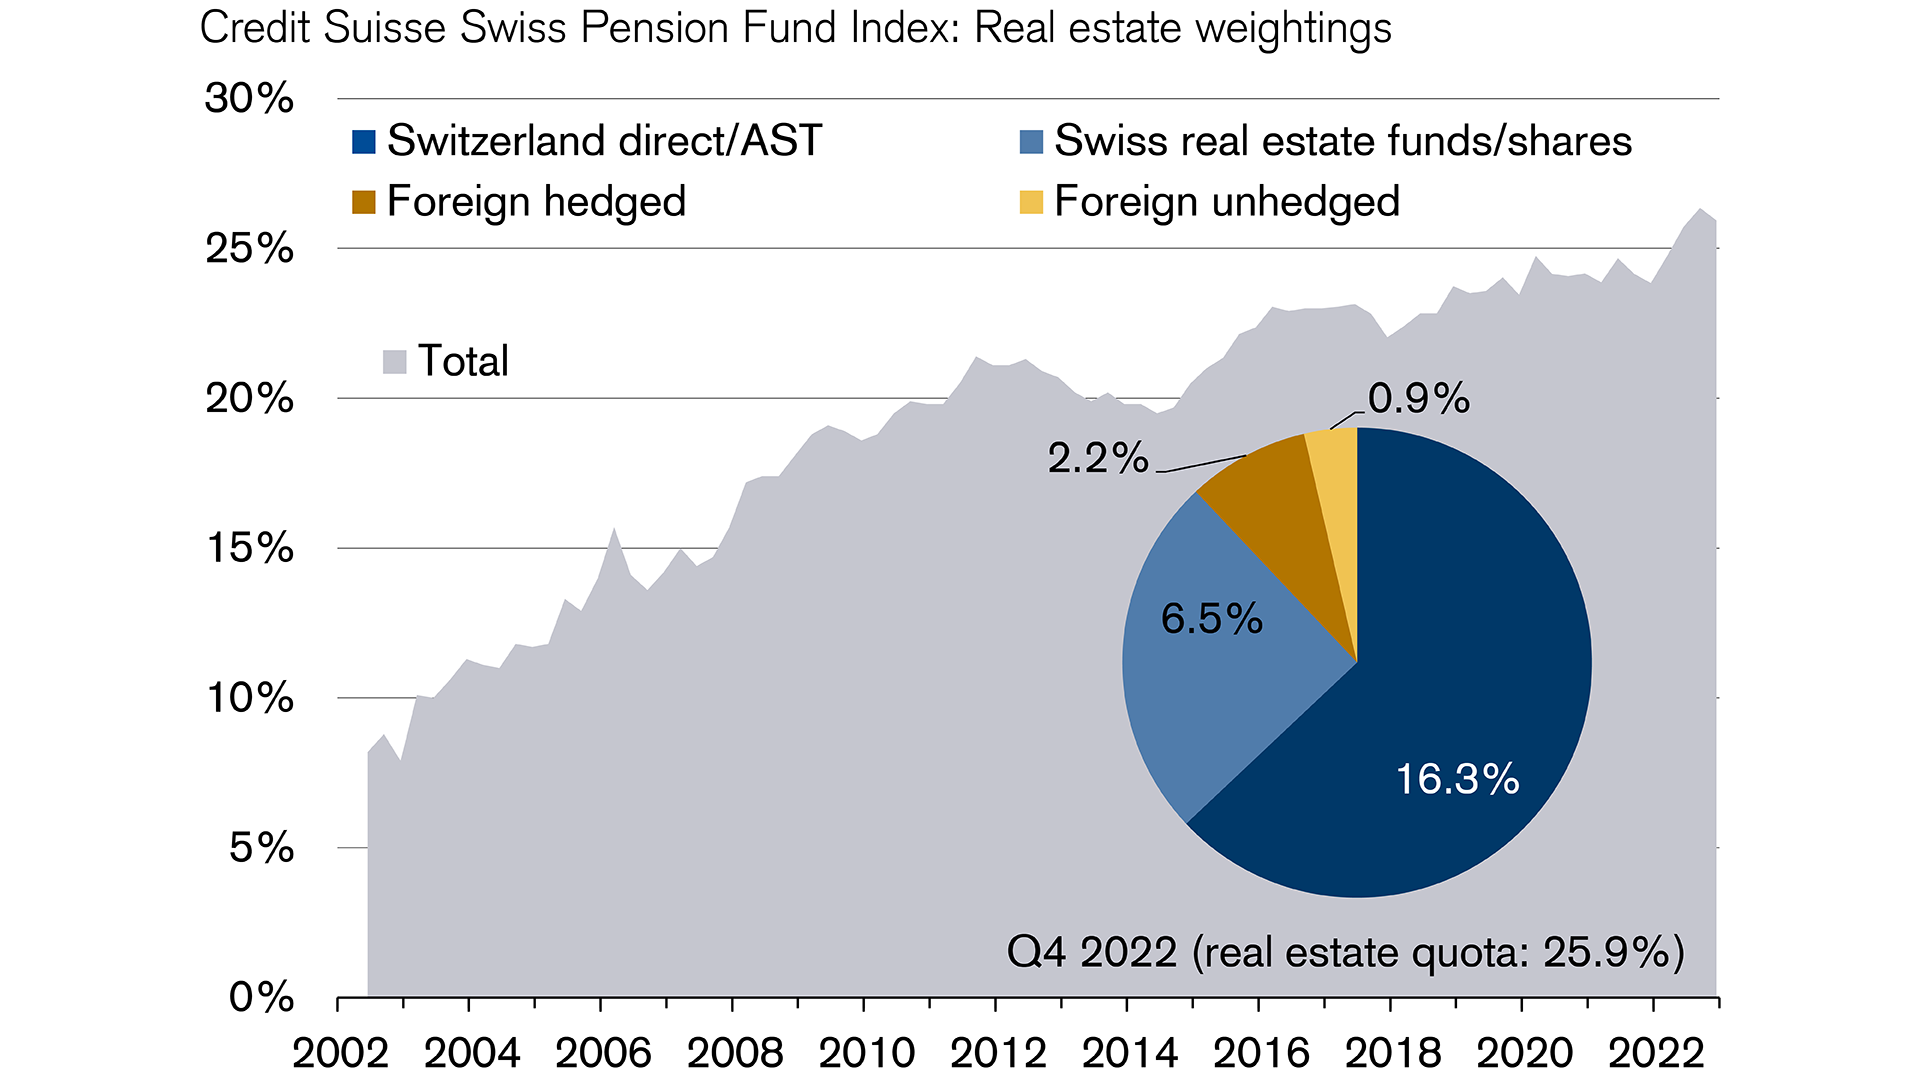 Real estate investing: Real estate ratio of pension funds is at its highest level